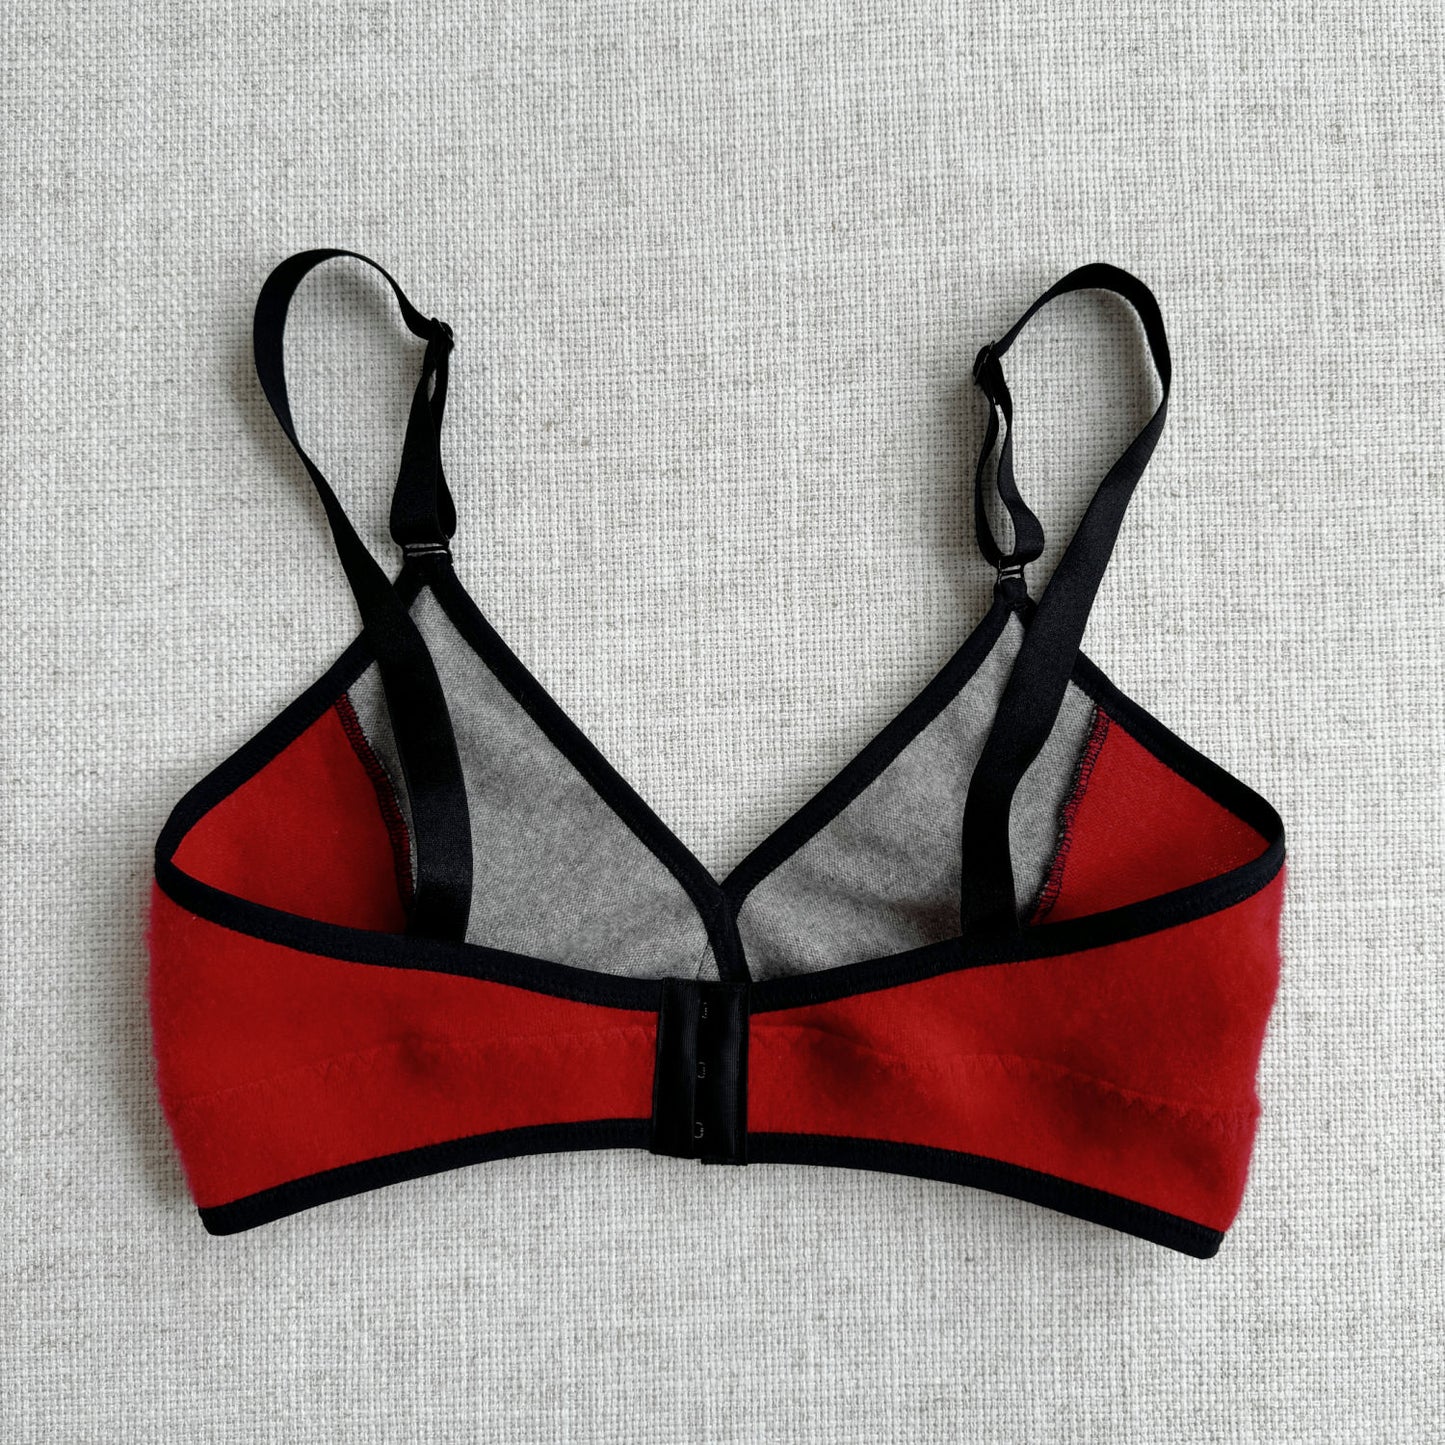 The unique long design of this cashmere bra top sets it apart from traditional bras, offering a touch of elegance and extended coverage. The harmonious blend of Grey and Red hues creates a visually striking contrast, perfect for those looking to add a pop of color to their wardrobe. Each piece is expertly handcrafted by Canadian artisans, ensuring a high level of attention to detail and quality